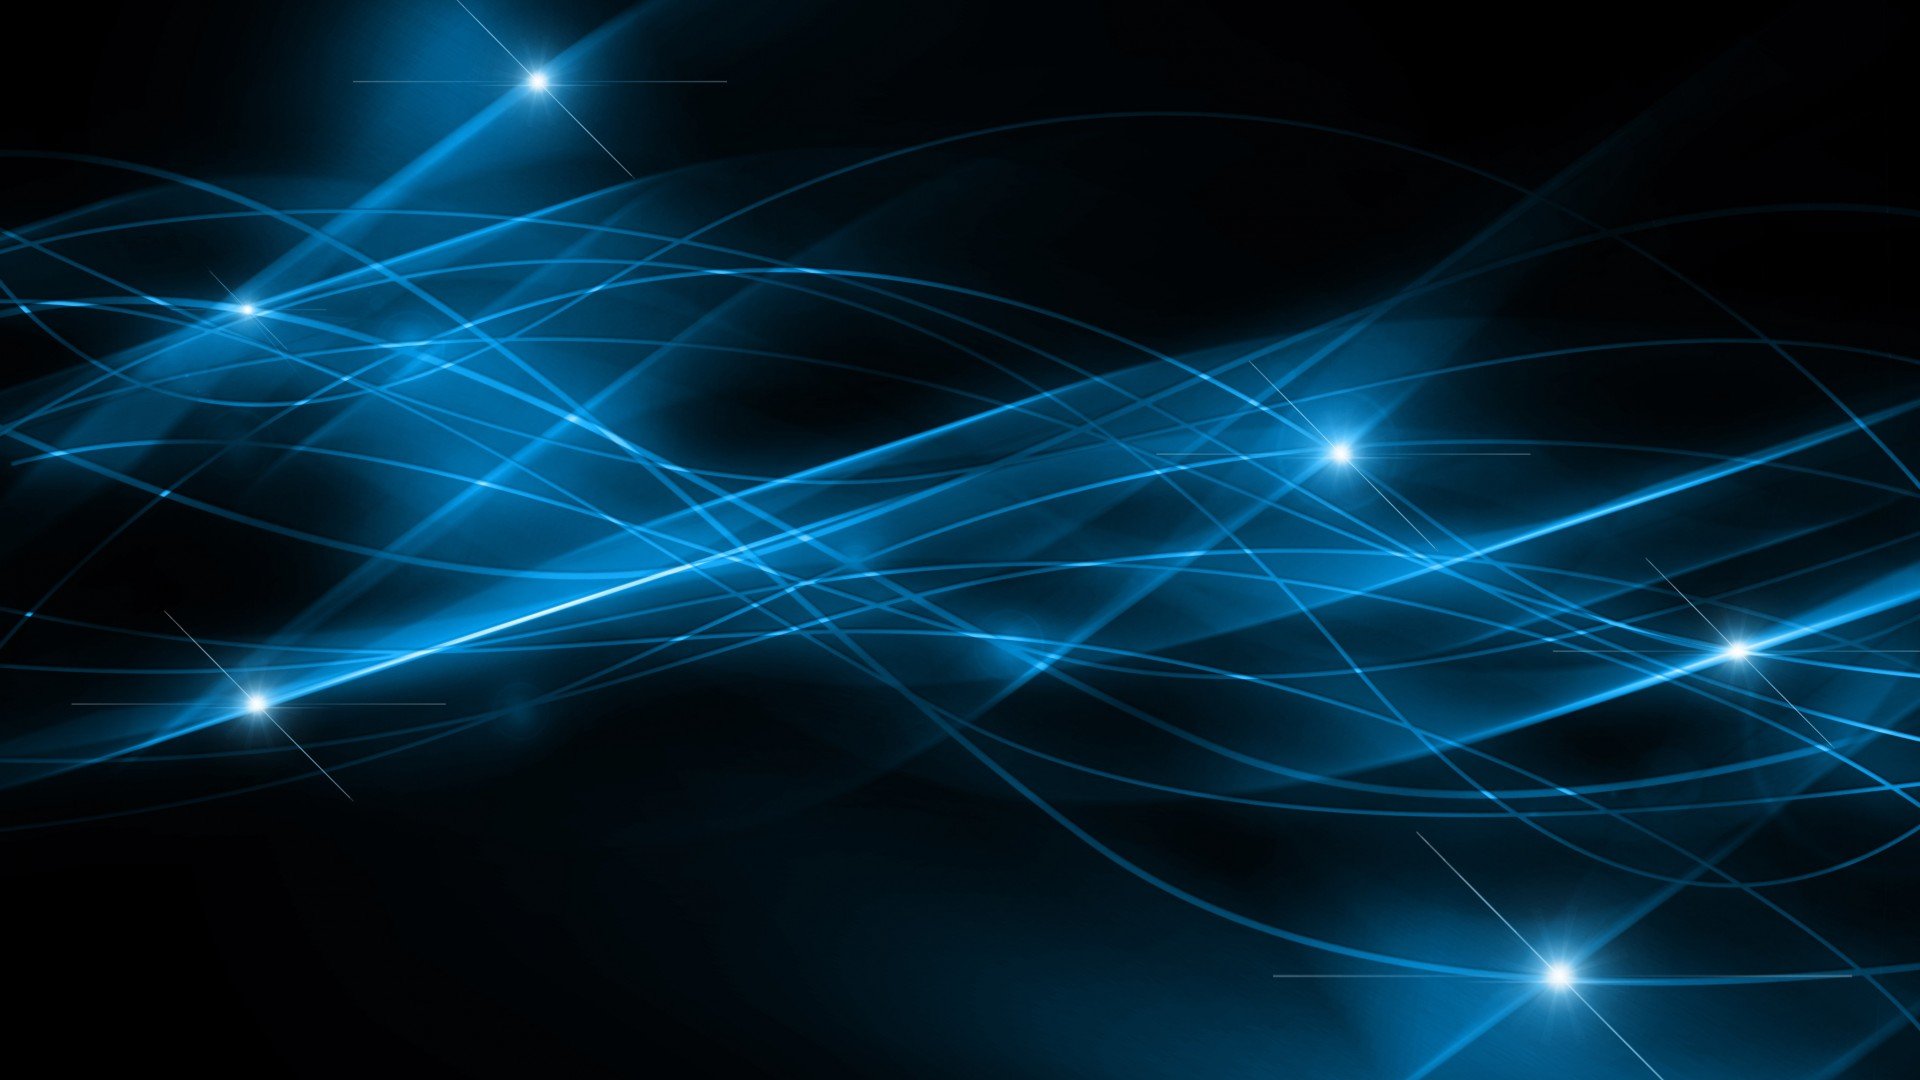 Black And Blue Abstract Backgrounds Hd 1080P HD